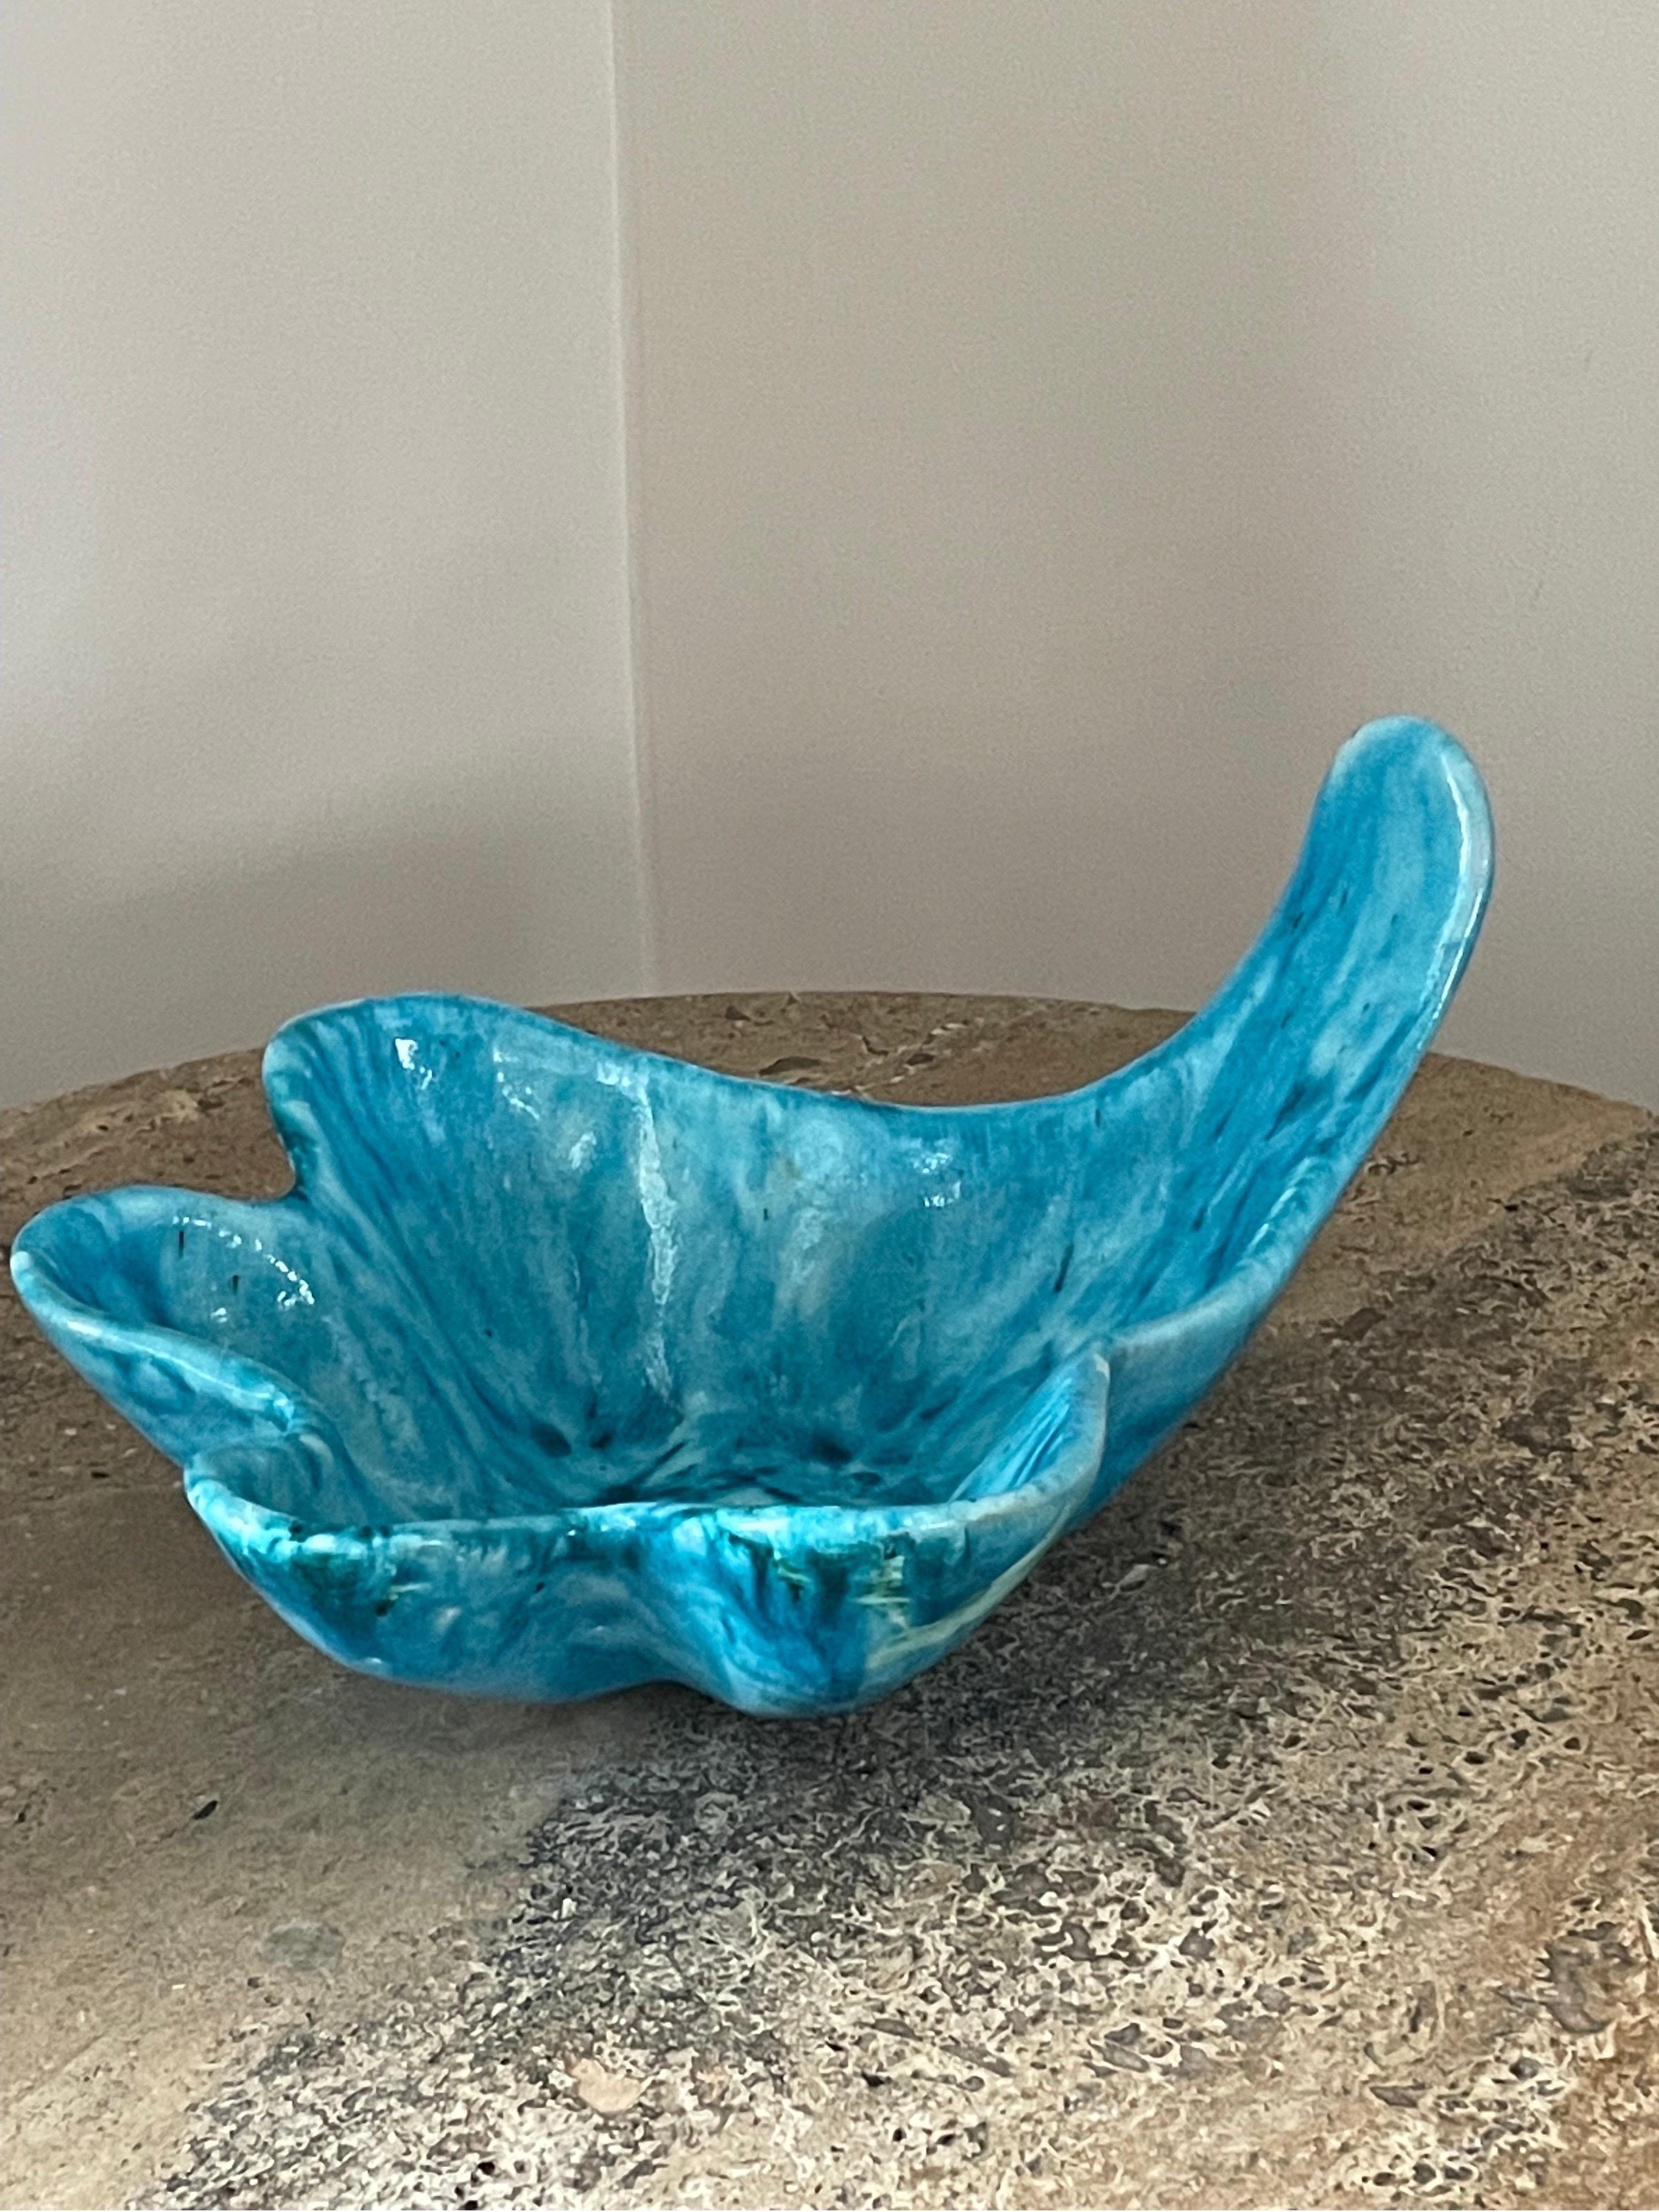 A beautiful free form or organic shaped bowl by Guido Gambone. An unusual shape which varies greatly from much of normal shapes seen in Guido Gambone's work. In very good condition with normal glaze misses associated from the process. 

Overall